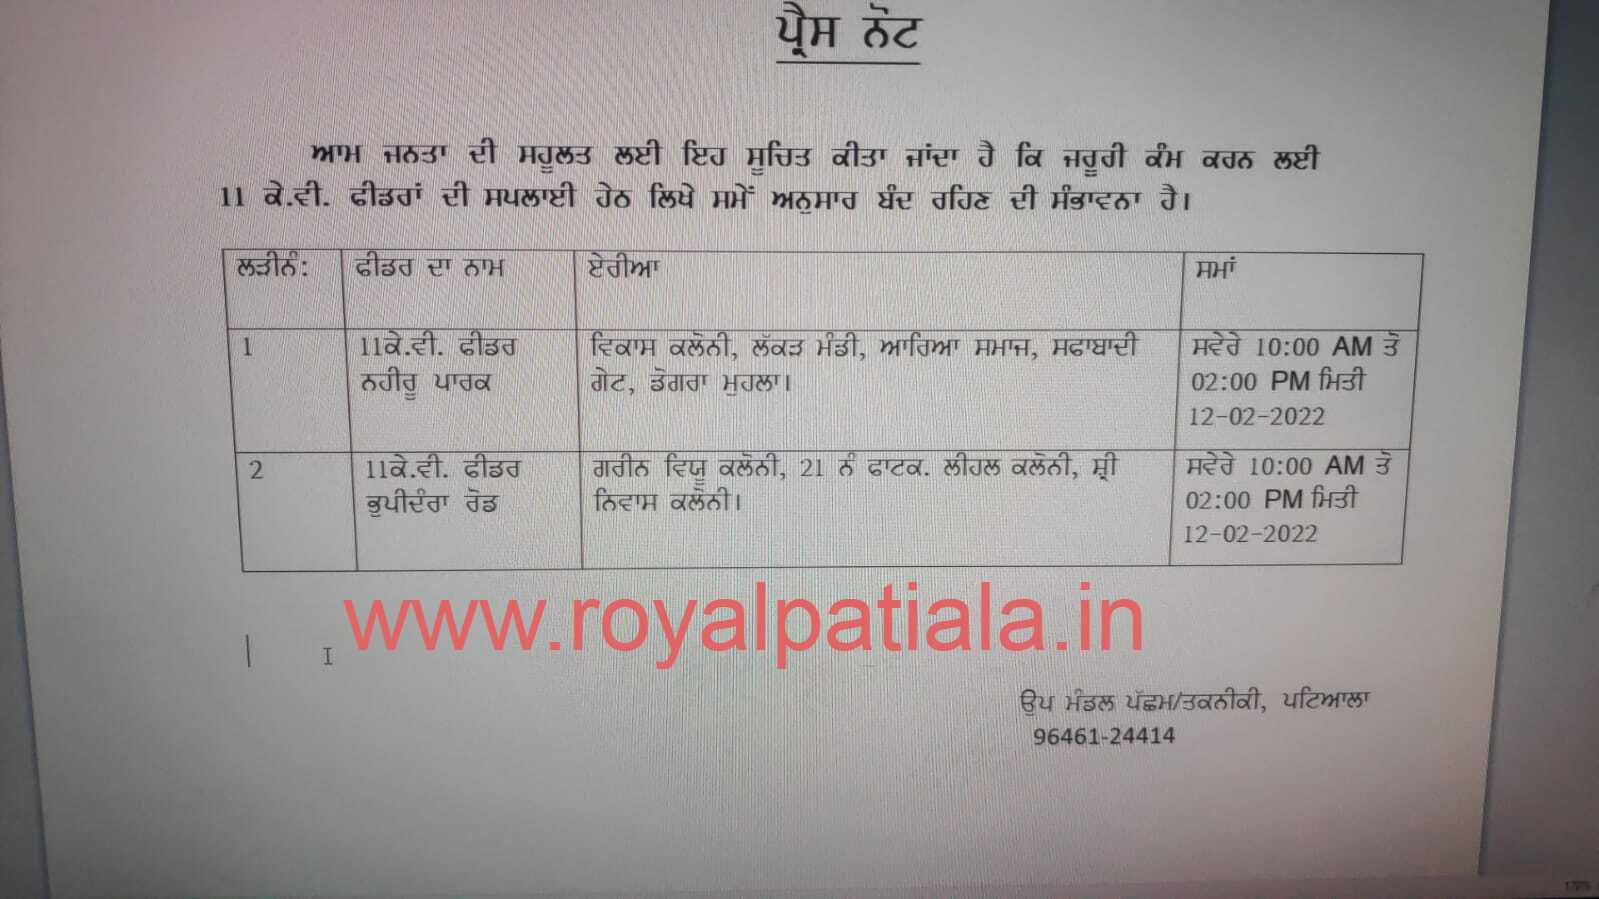 PSPCL announces February 12 power shut down in certain areas of Patiala